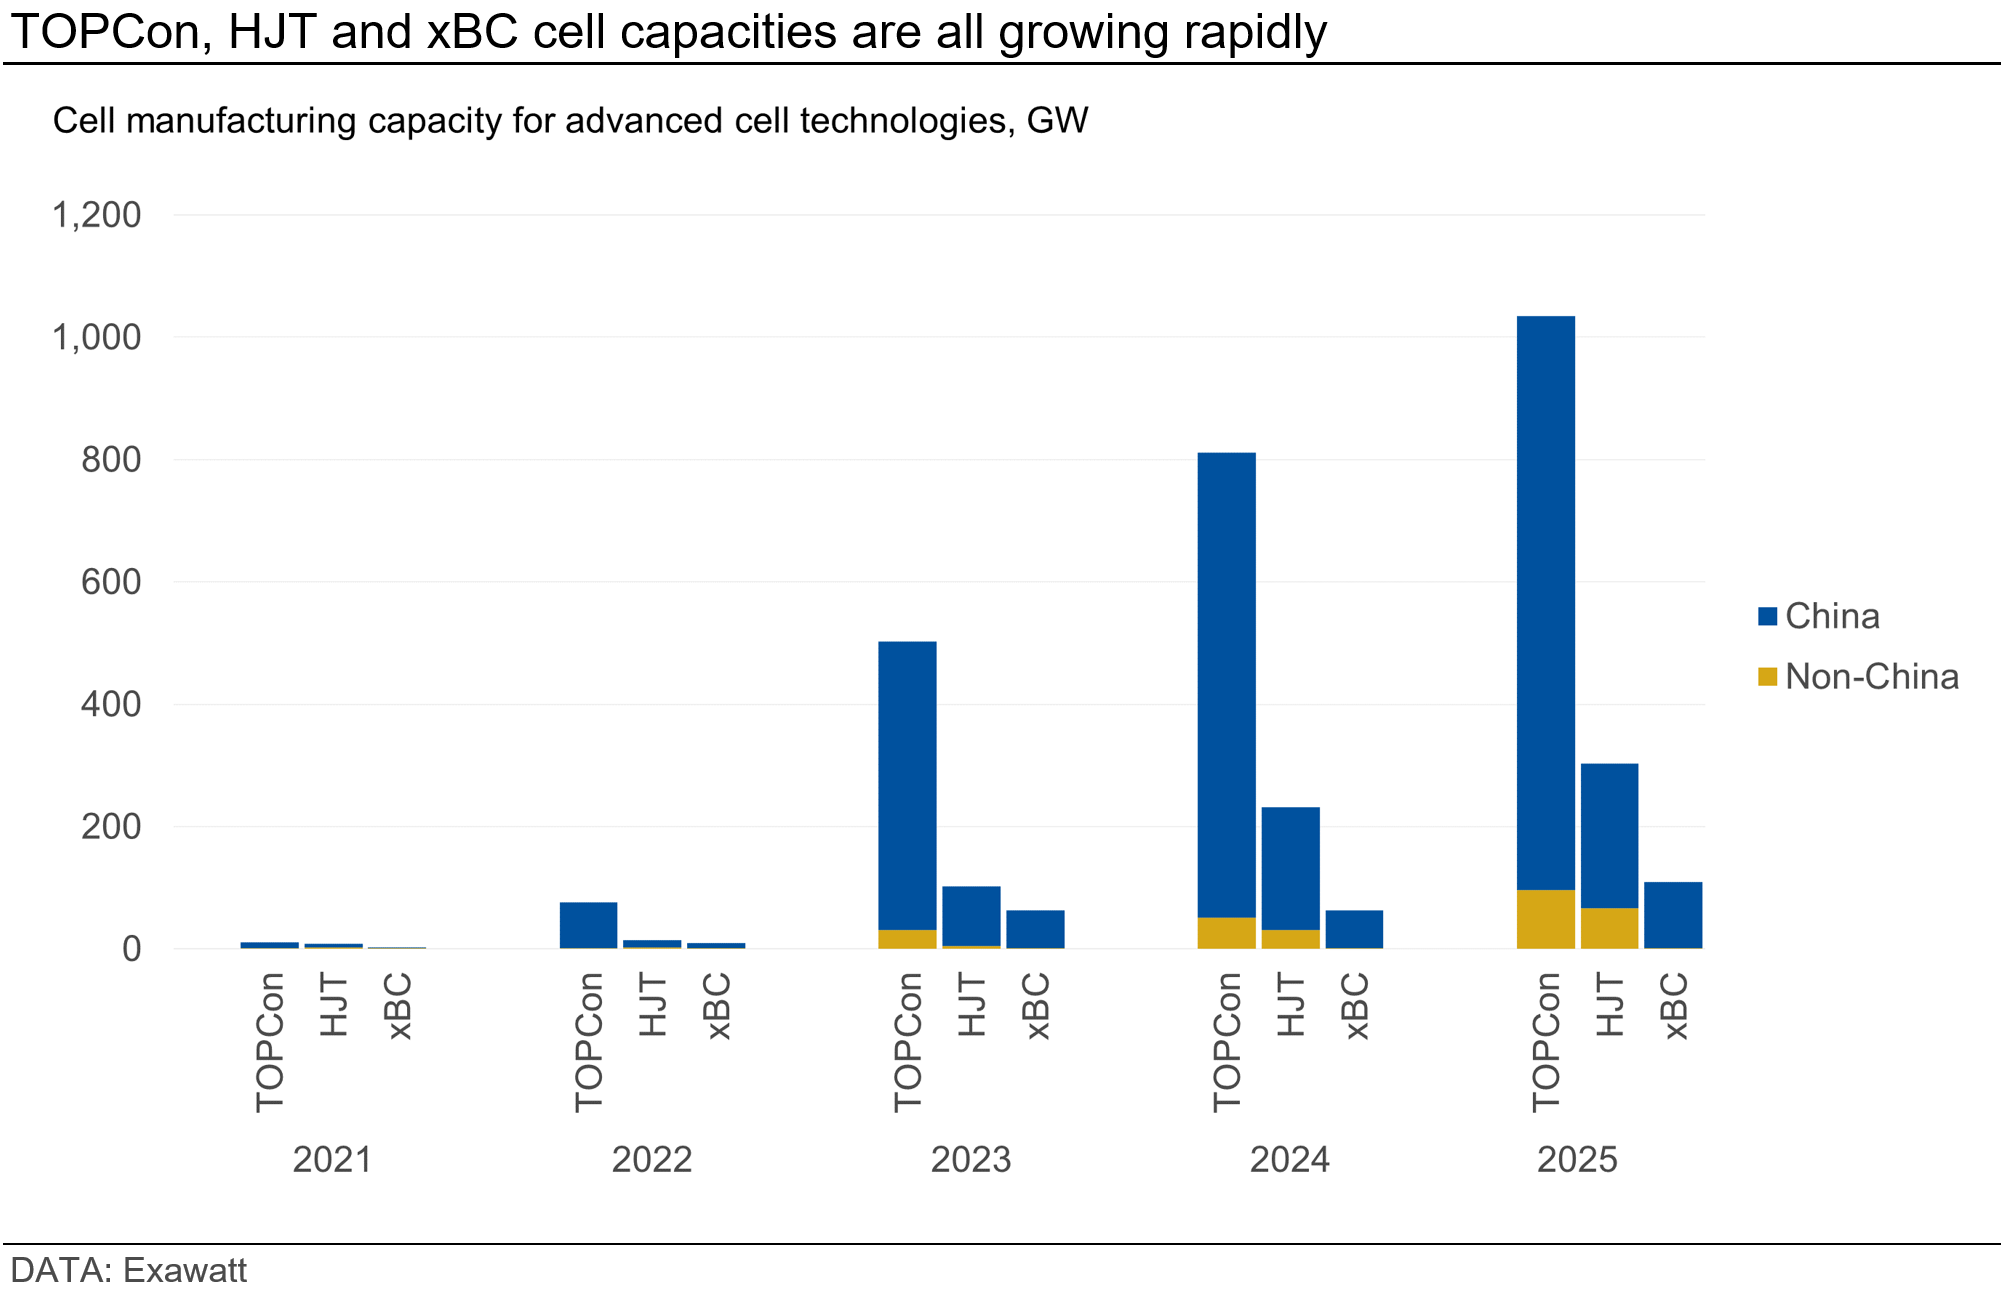 Graph showing that TOPCon, HJT and xBC cell capacities are all growing rapidly